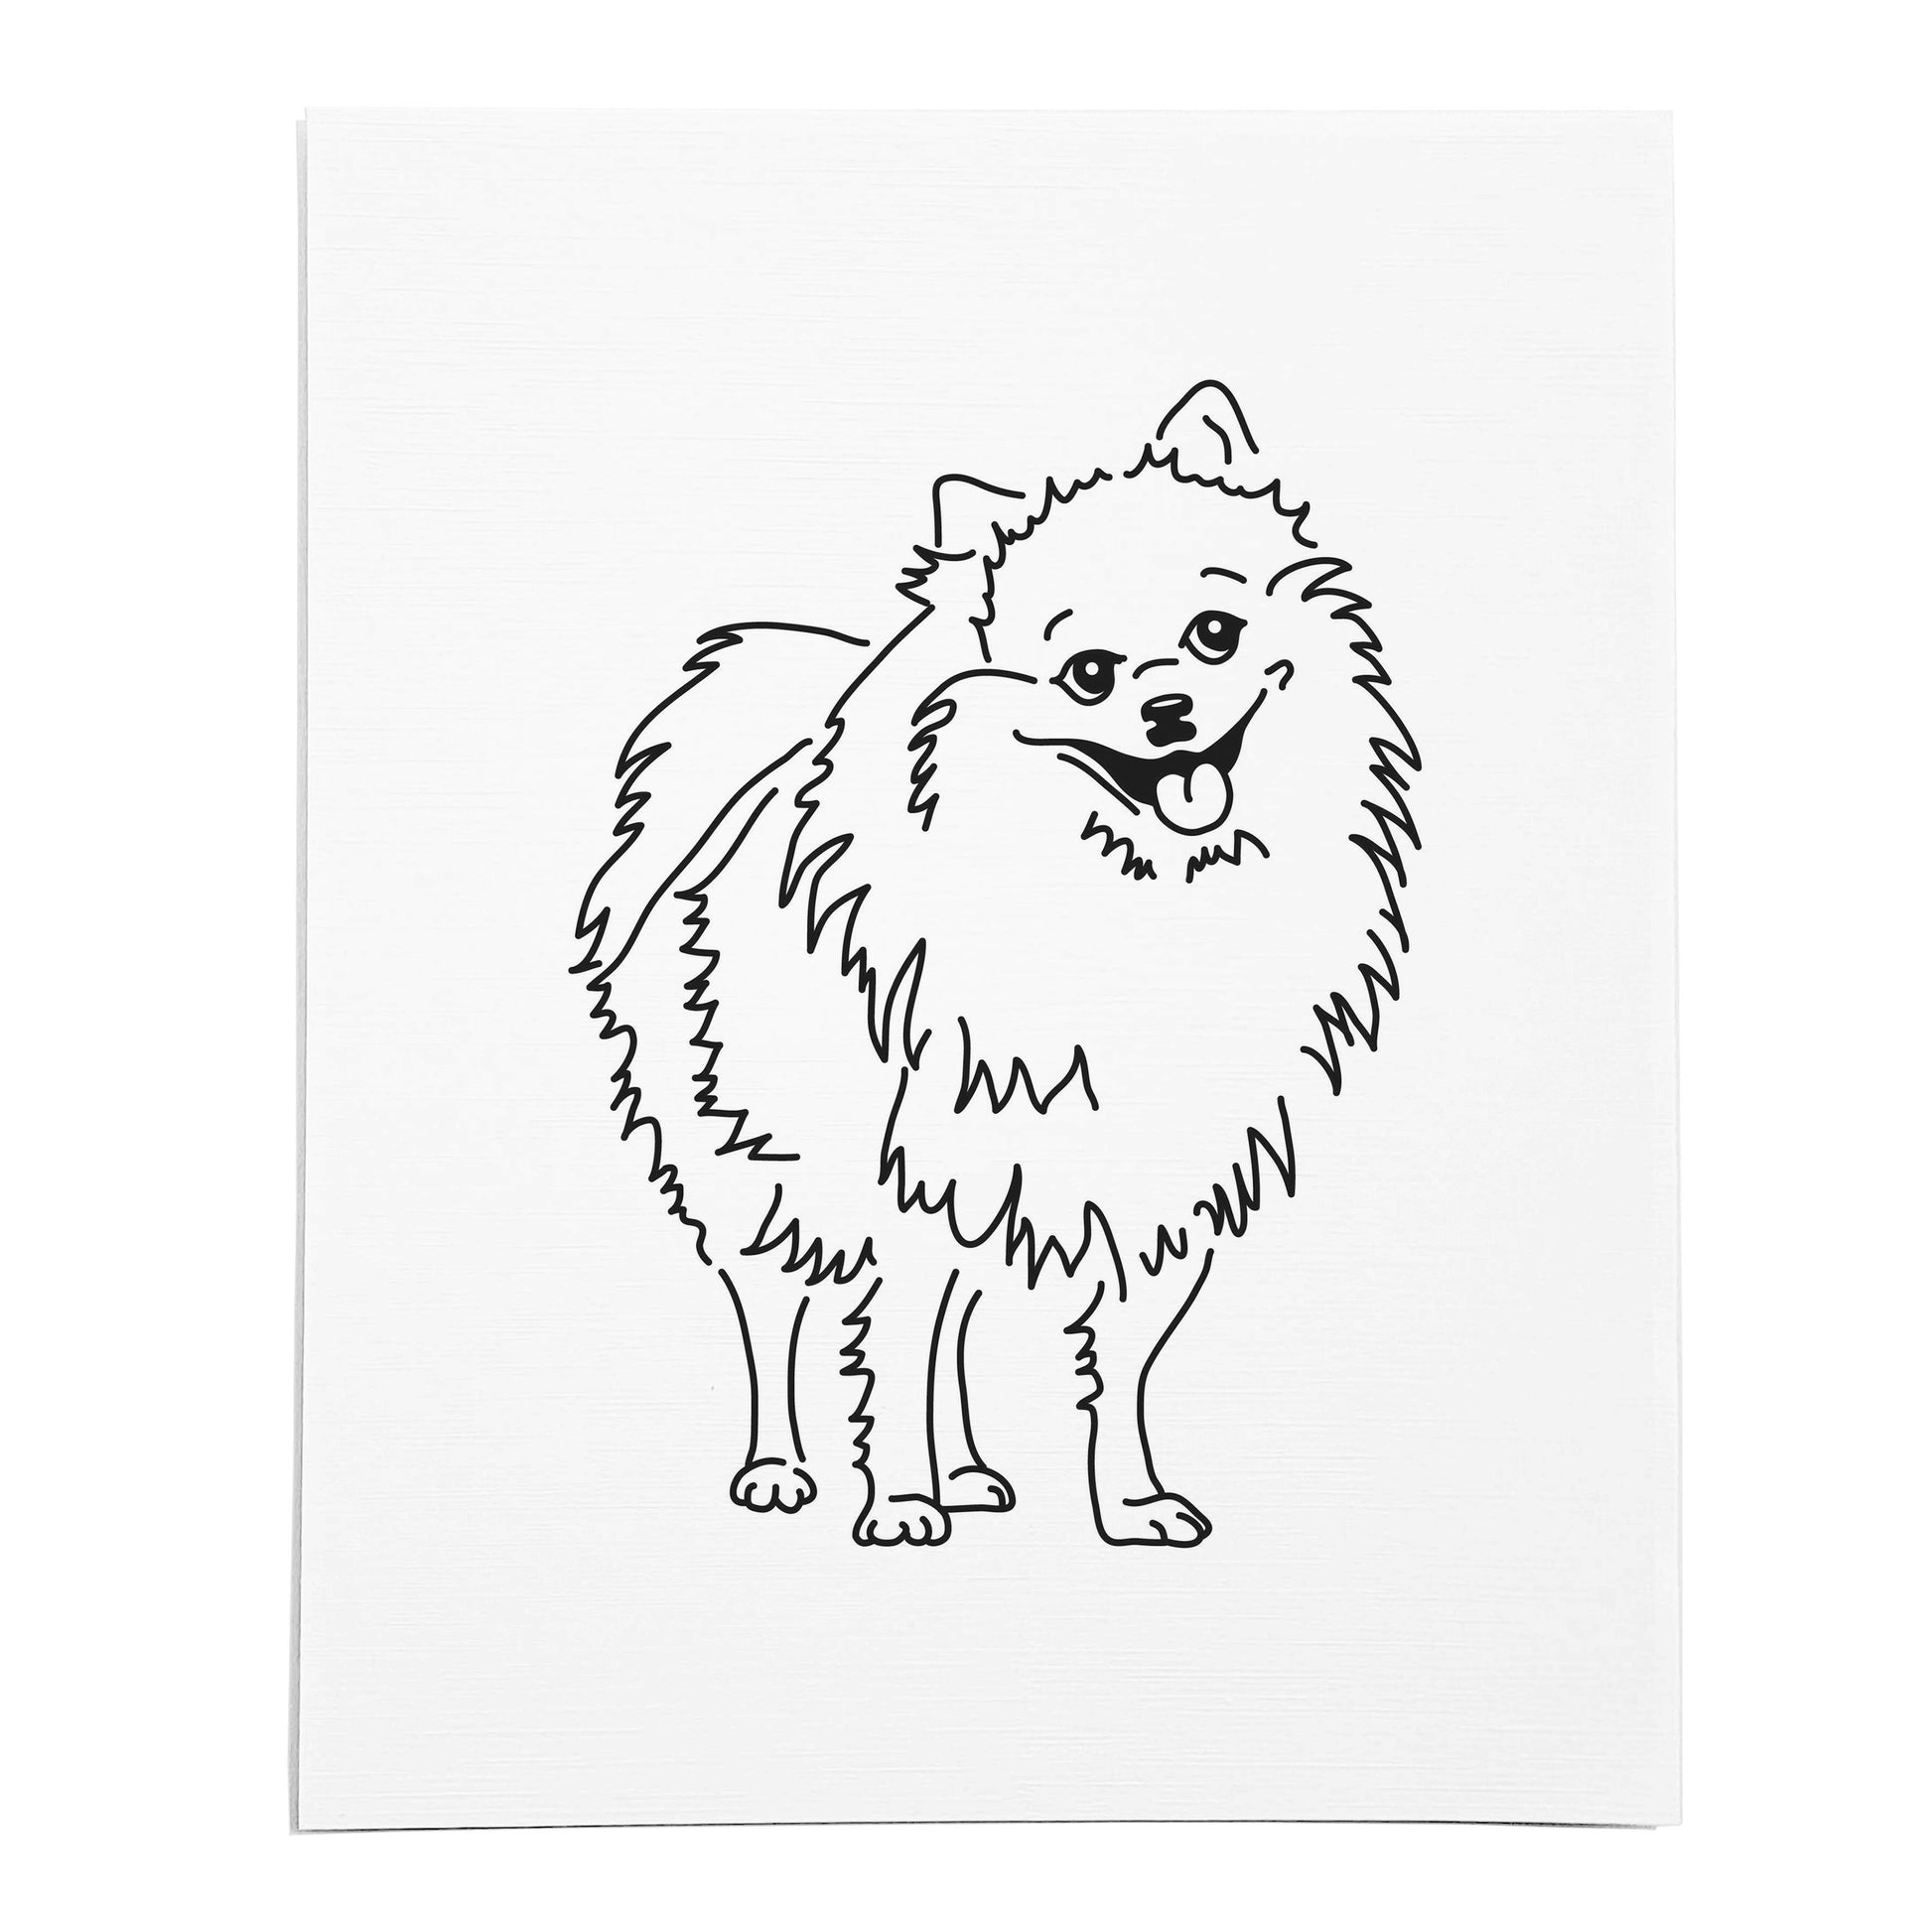 An art print featuring a line drawing of a Pomeranian dog on white linen paper